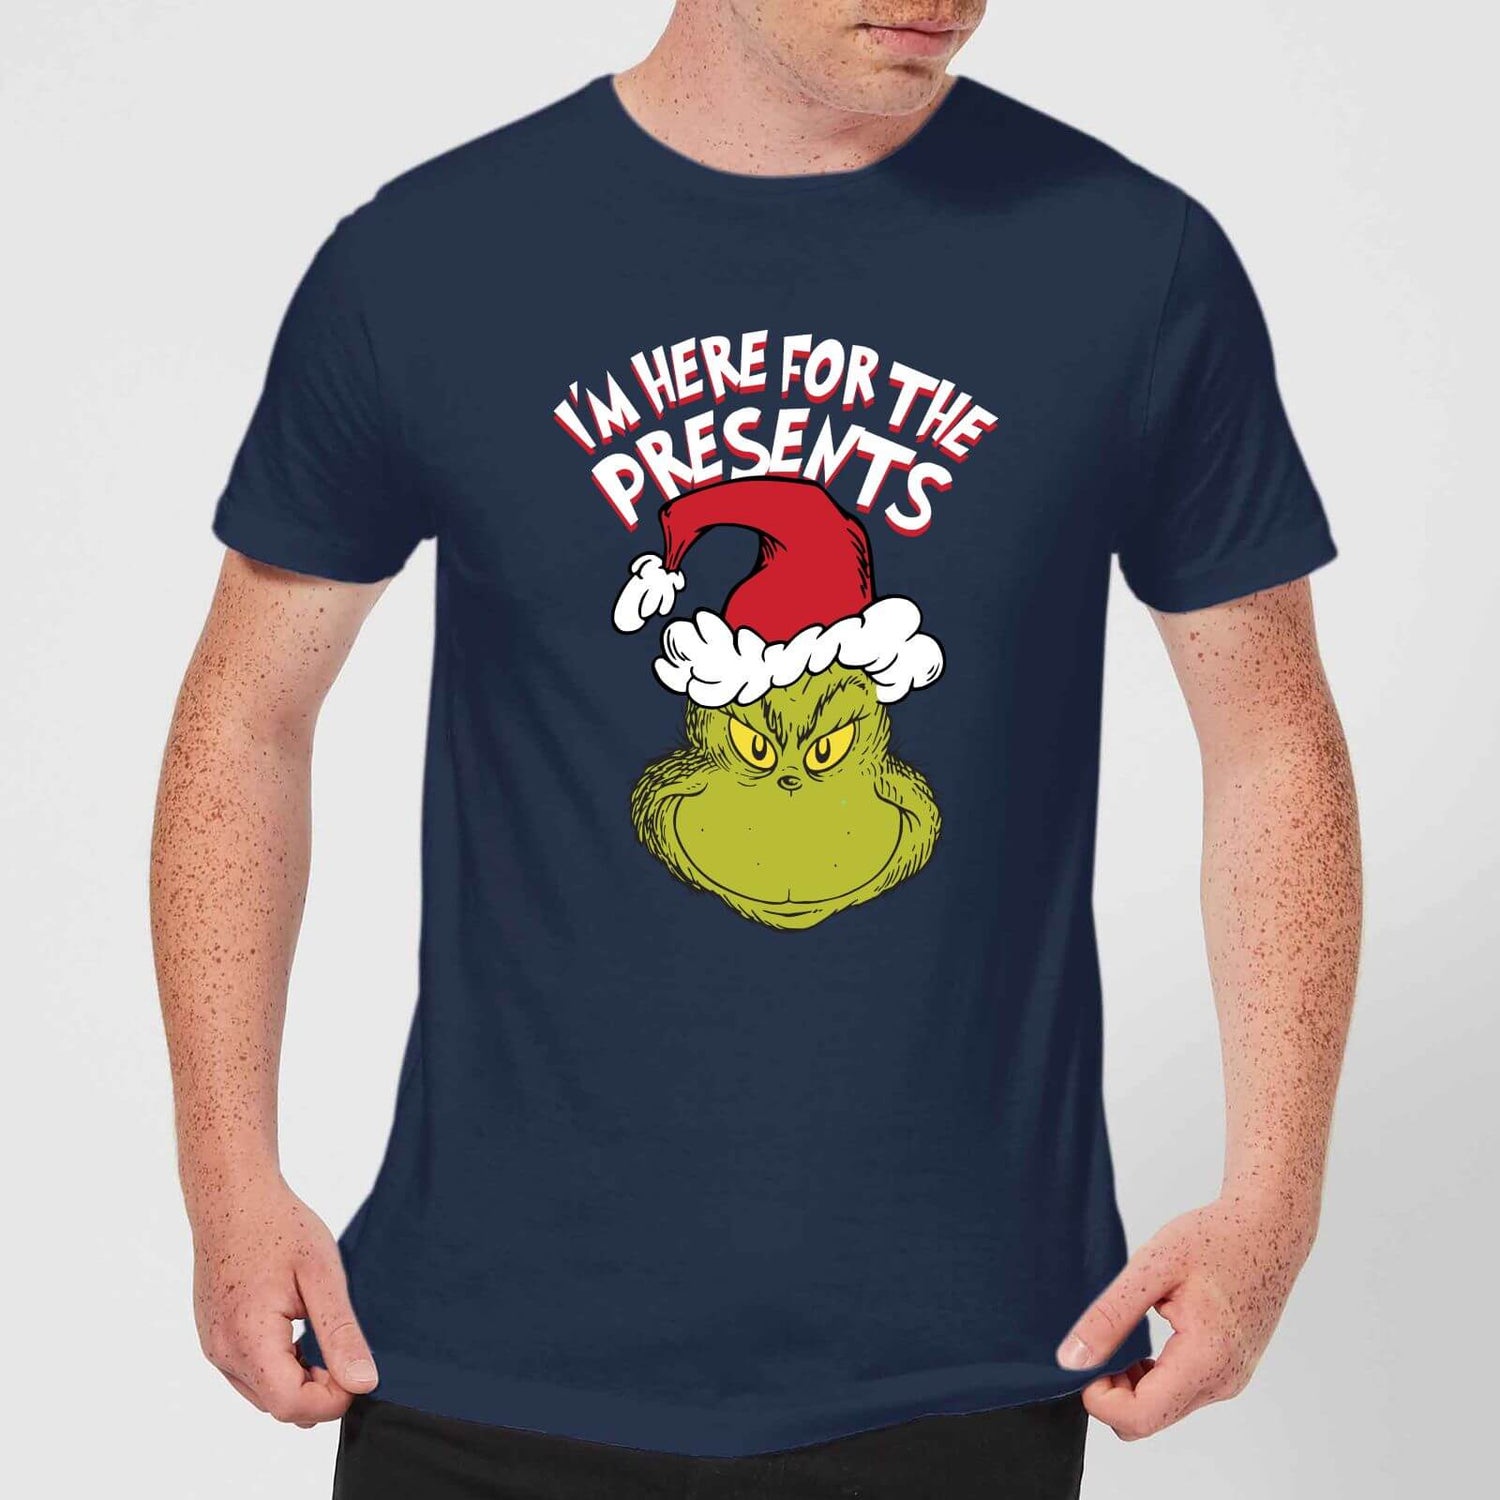 The Grinch Apparel & Accessories